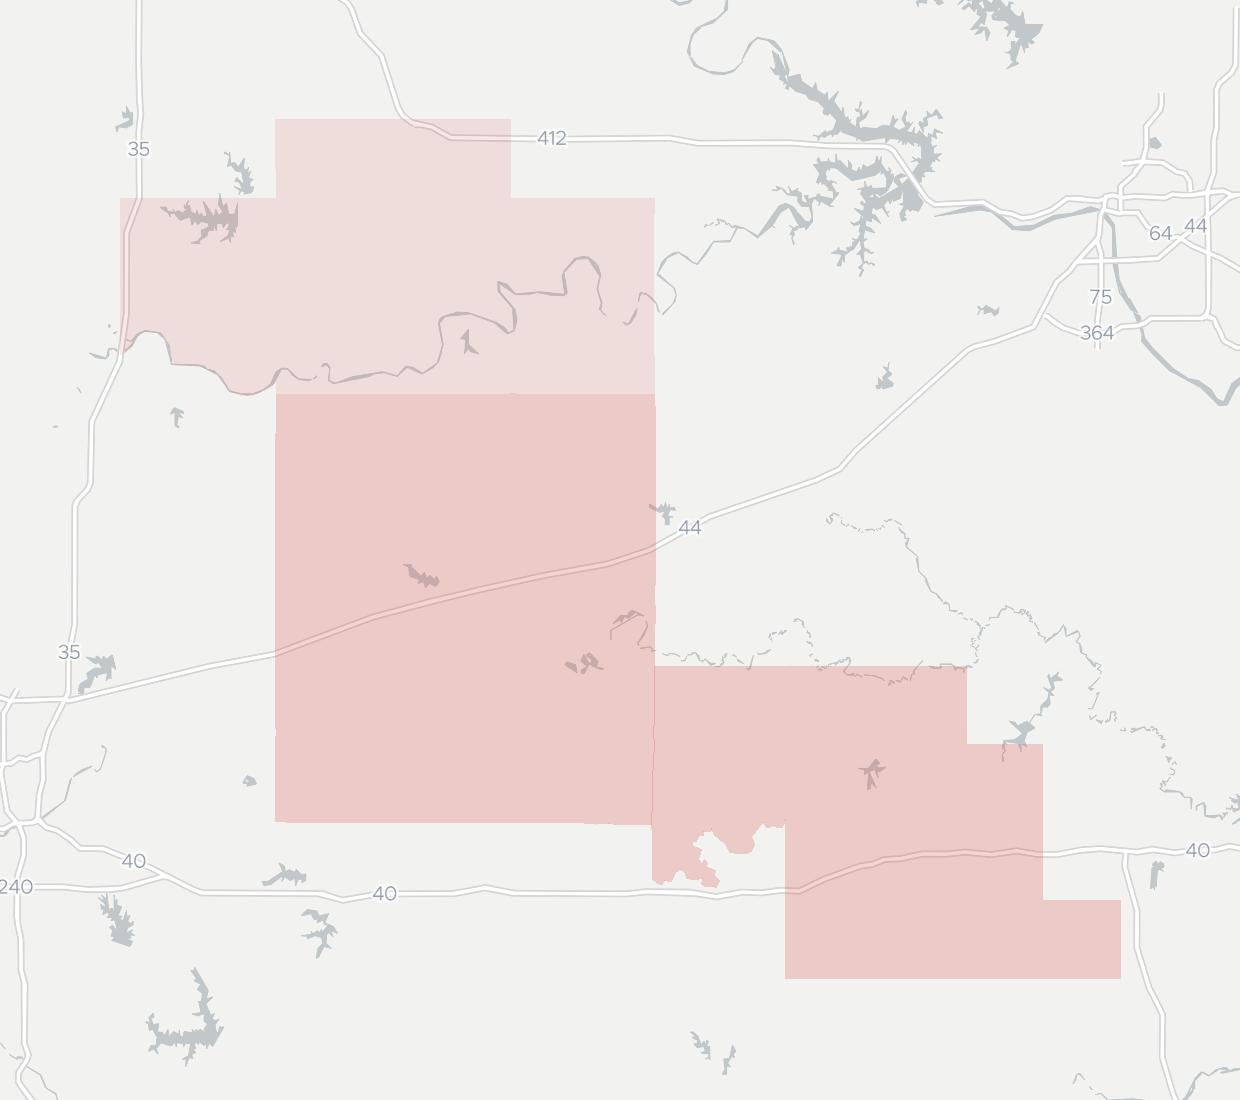 Central Oklahoma Telephone Availability Map. Click for interactive map